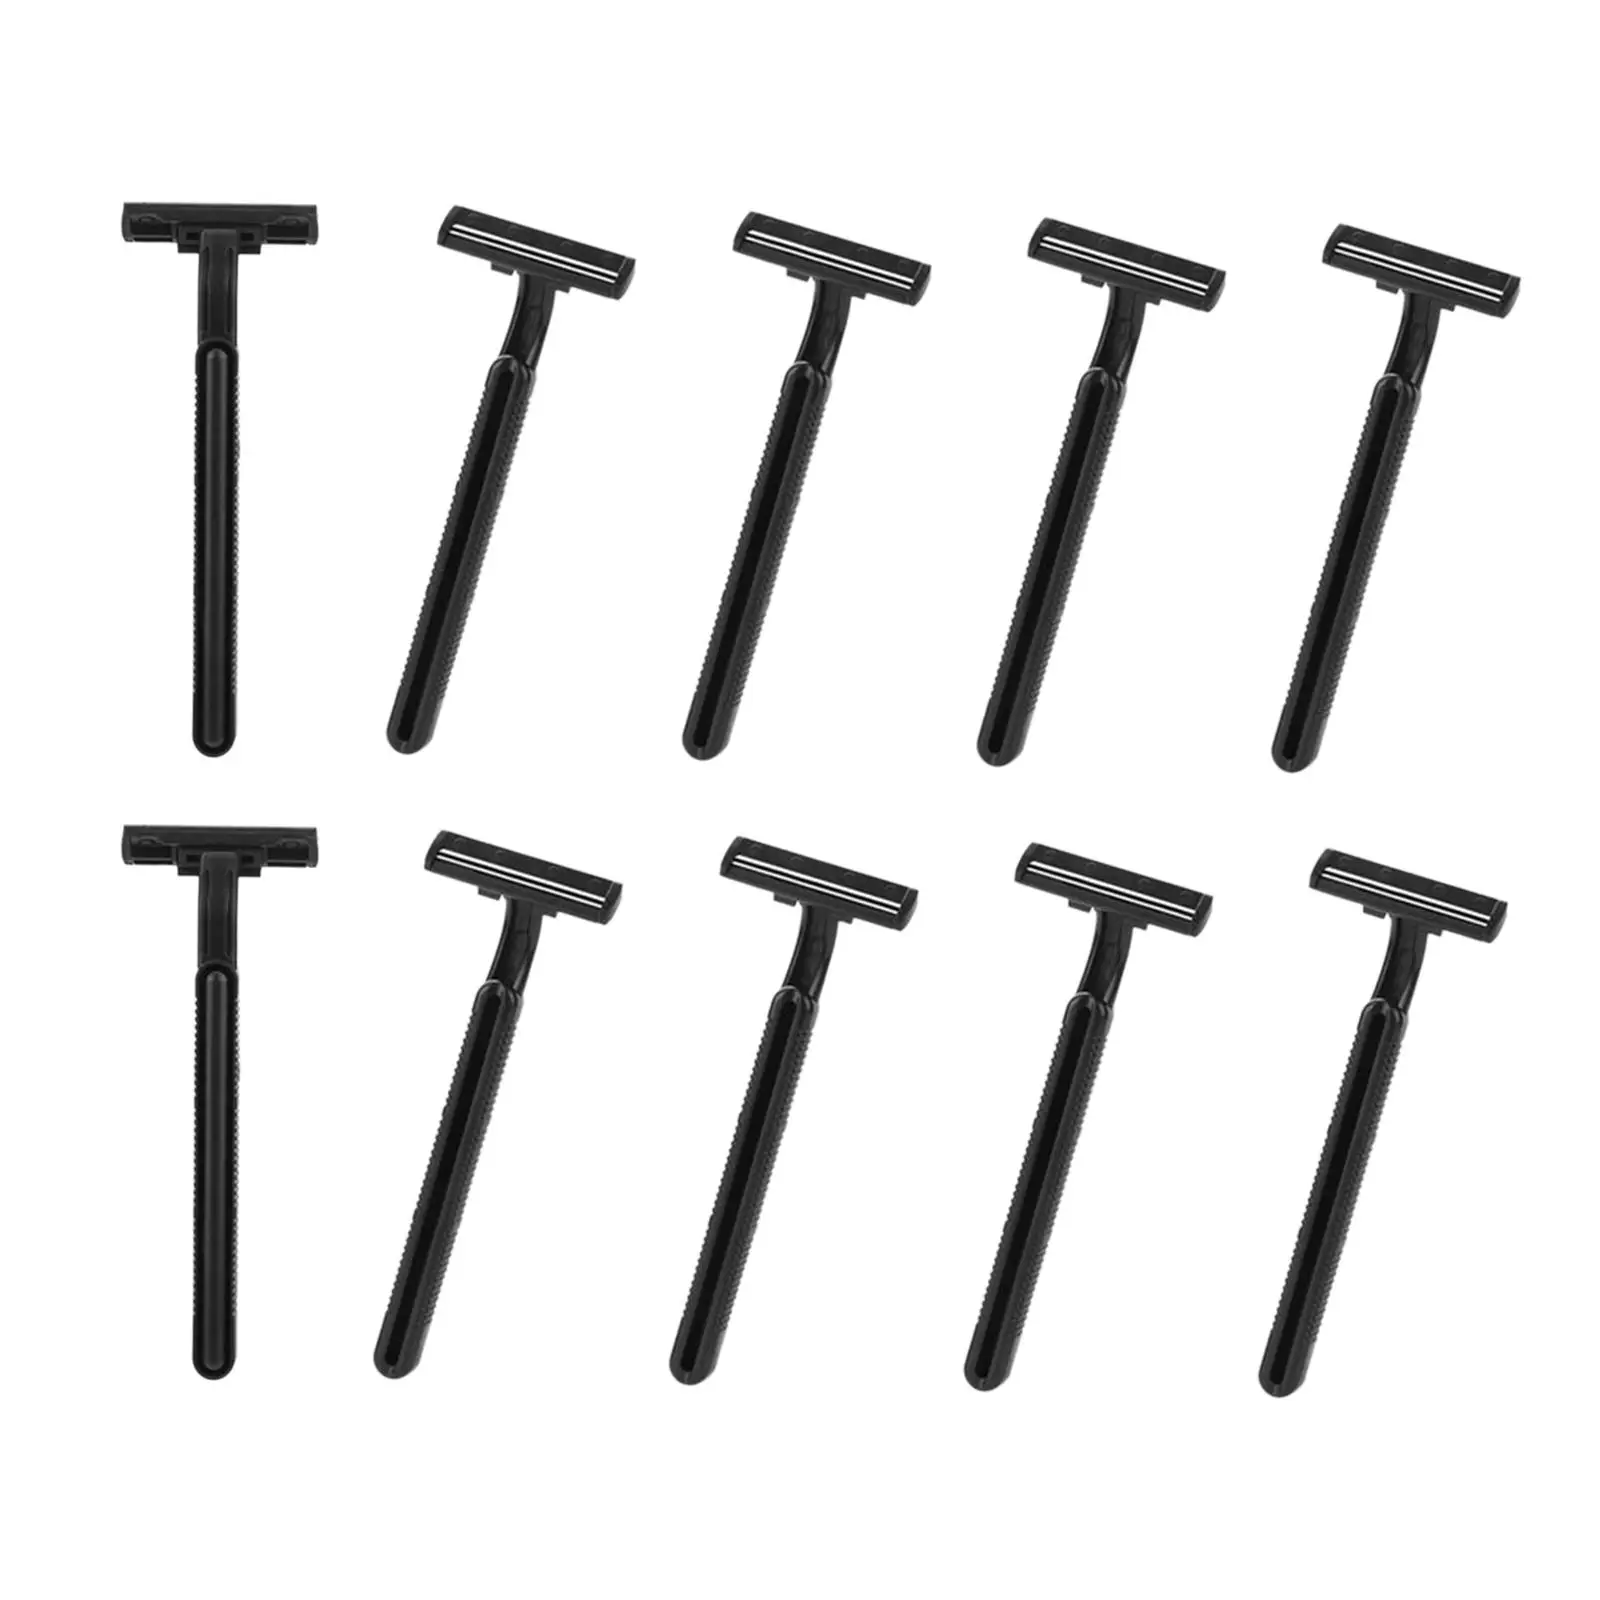 10Pcs Disposable Shaver Shaving Grooming Tool Beard Shaver for Travel Male Home Use